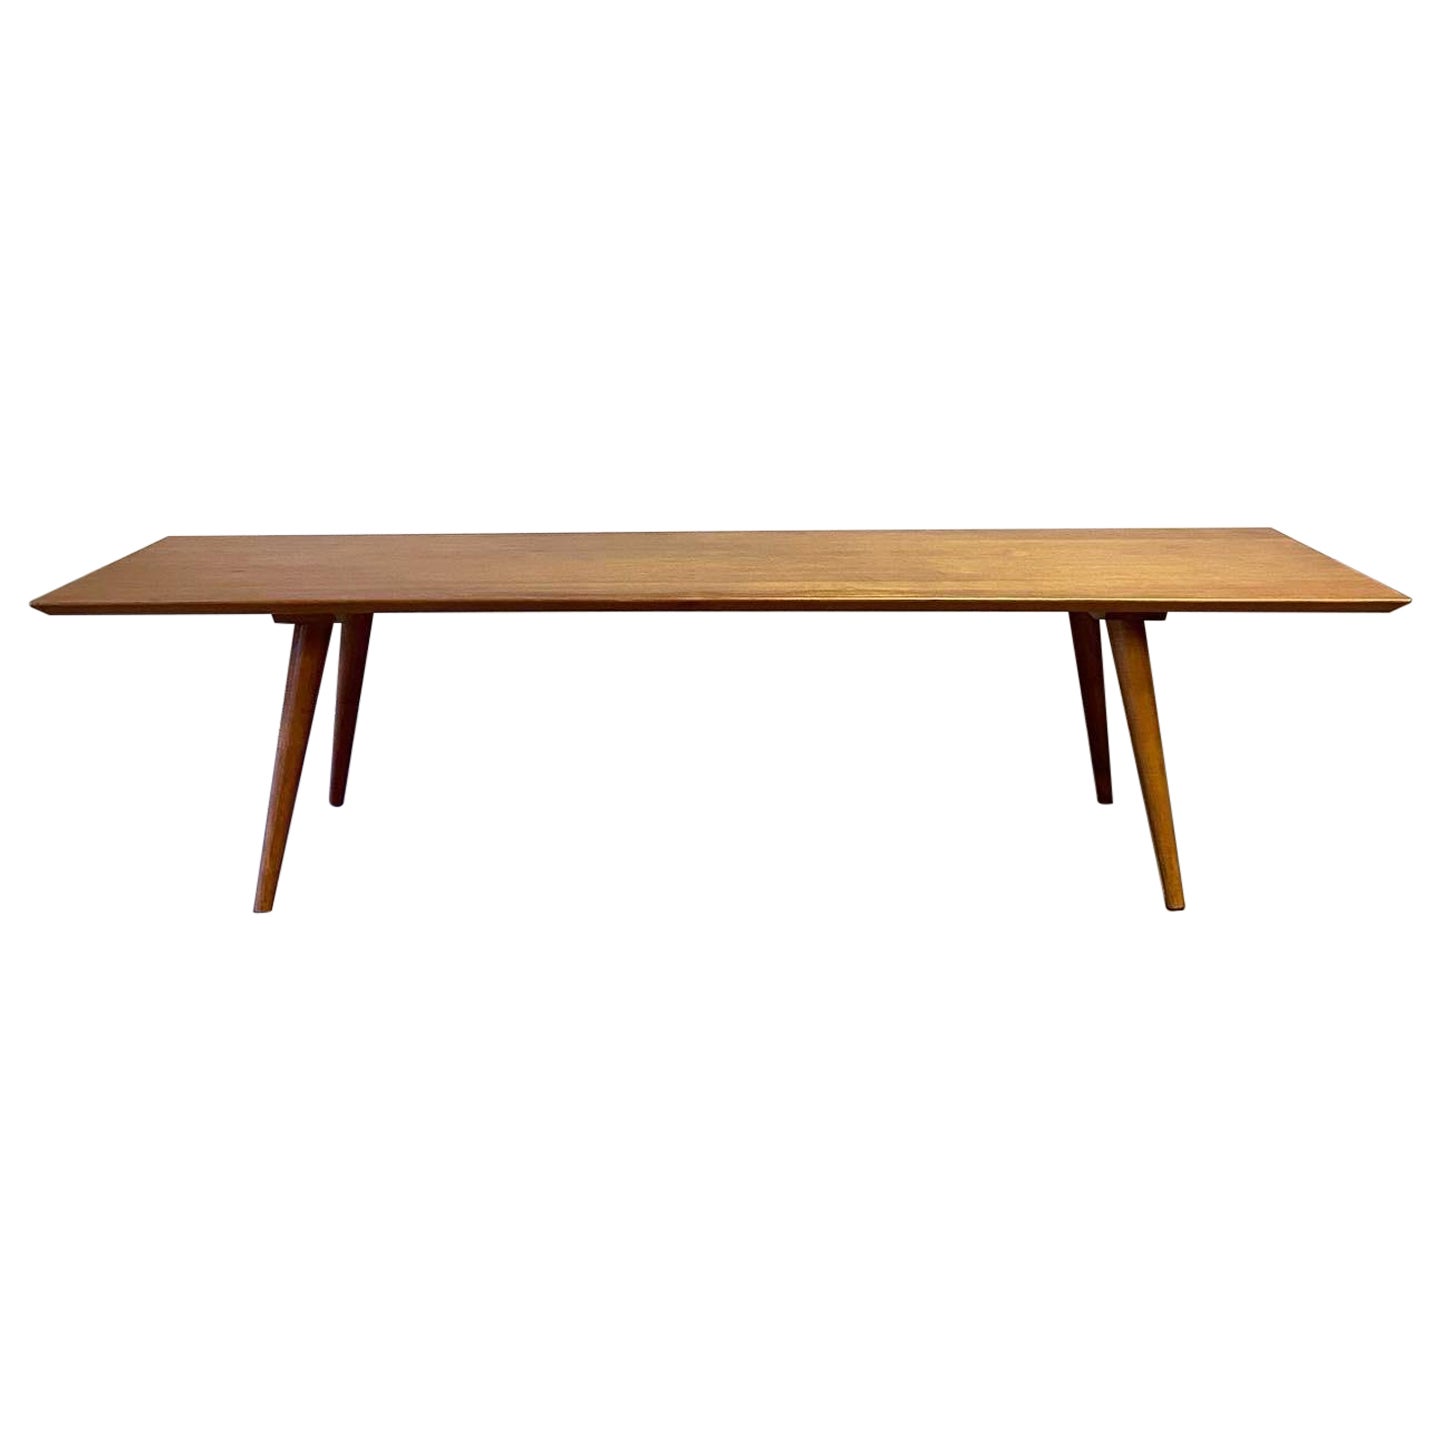 Paul McCobb Planner Group Winchendon Tobacco Coffee Table or Bench